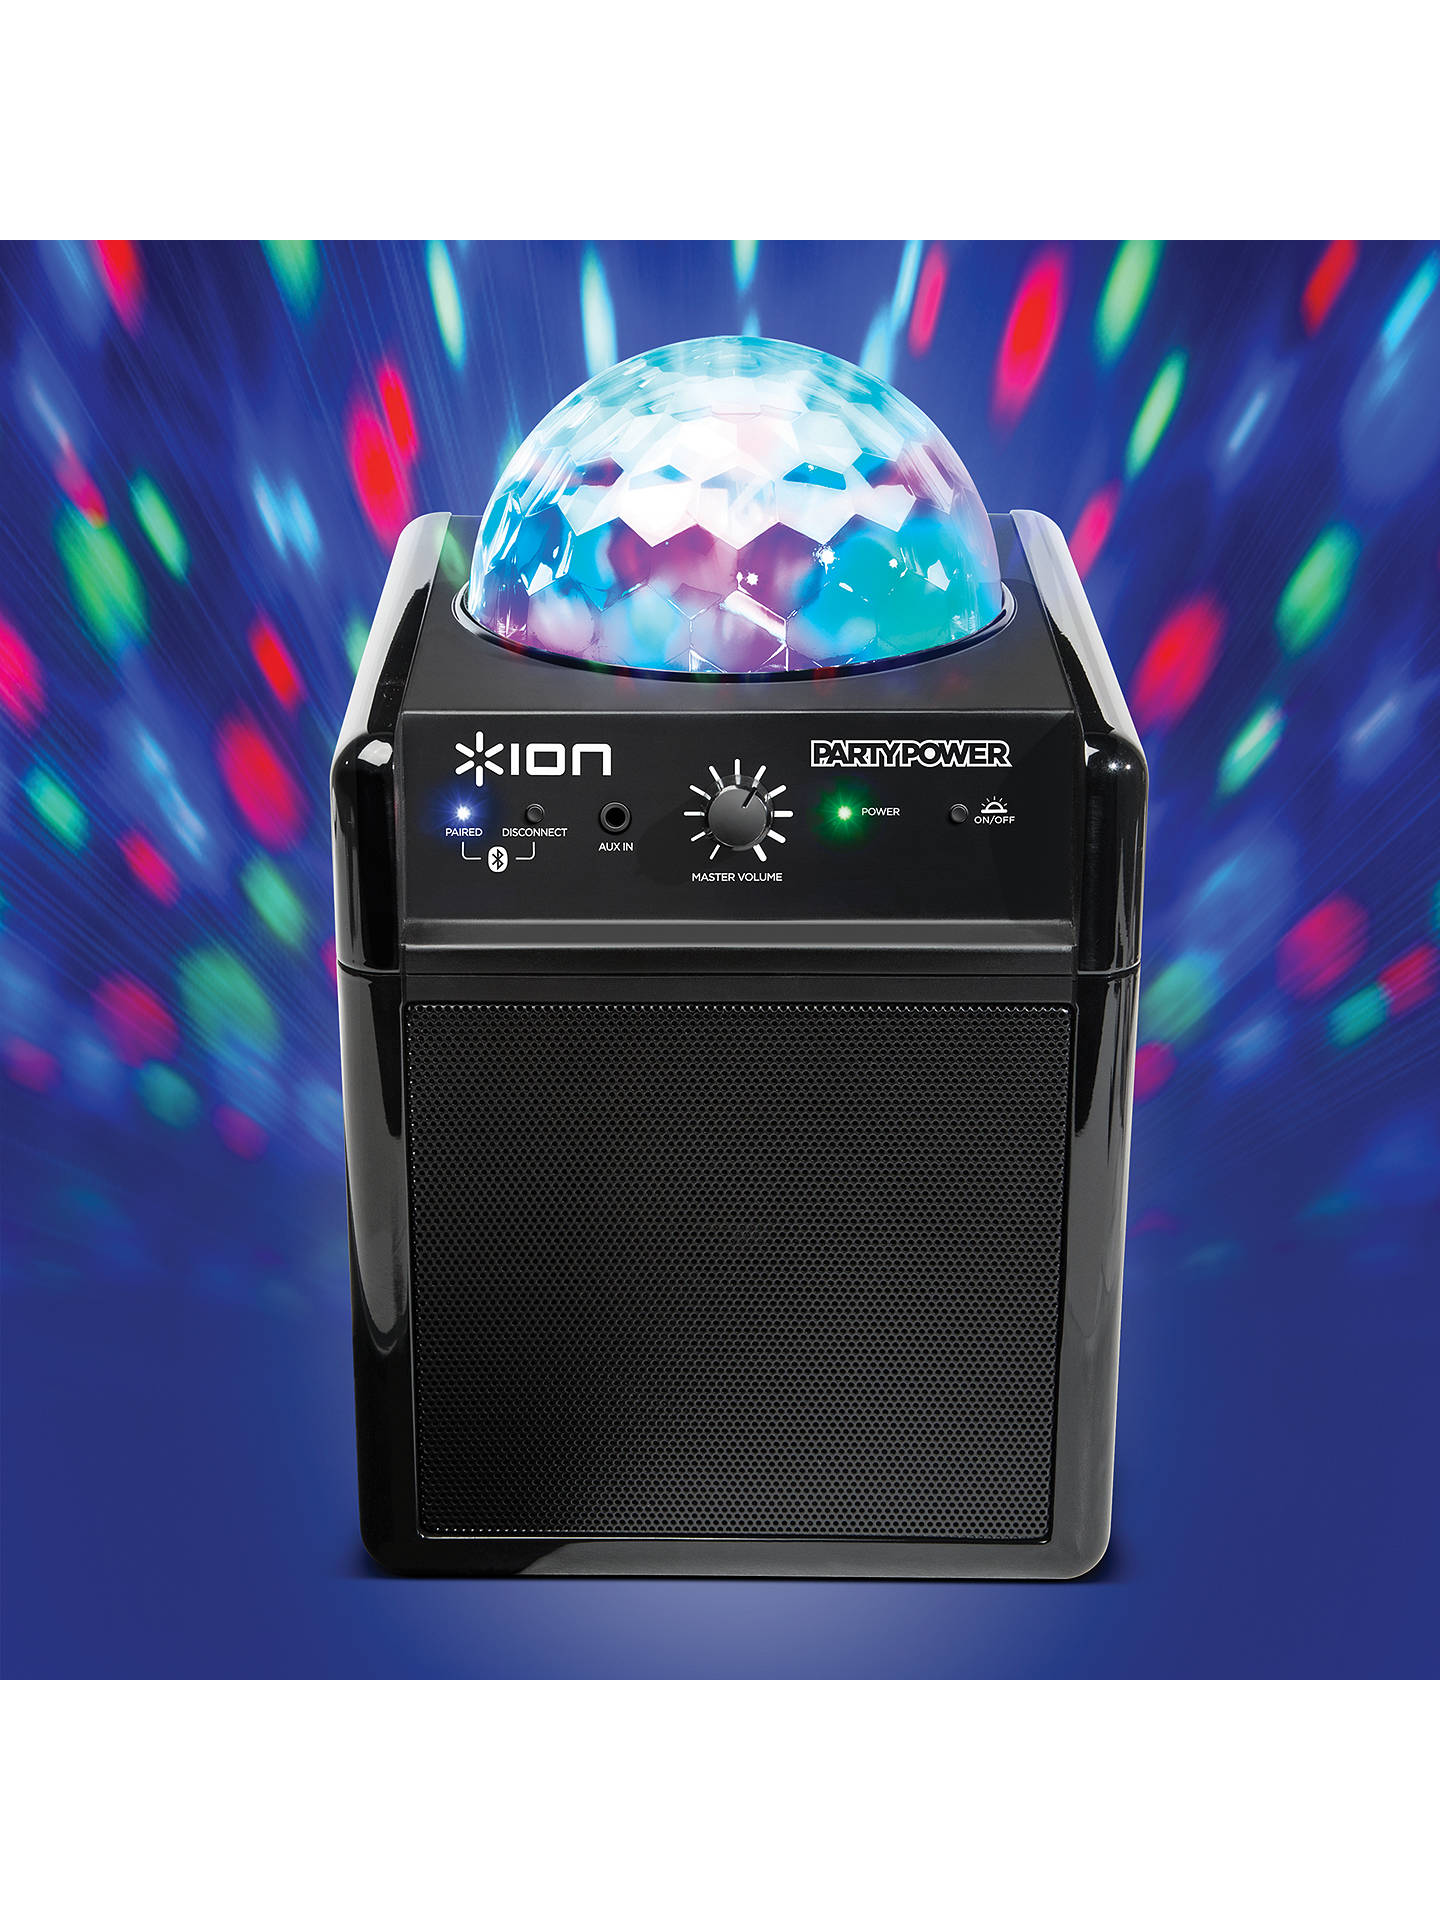 ION Party Power Portable Bluetooth Speaker with Party Lights at John